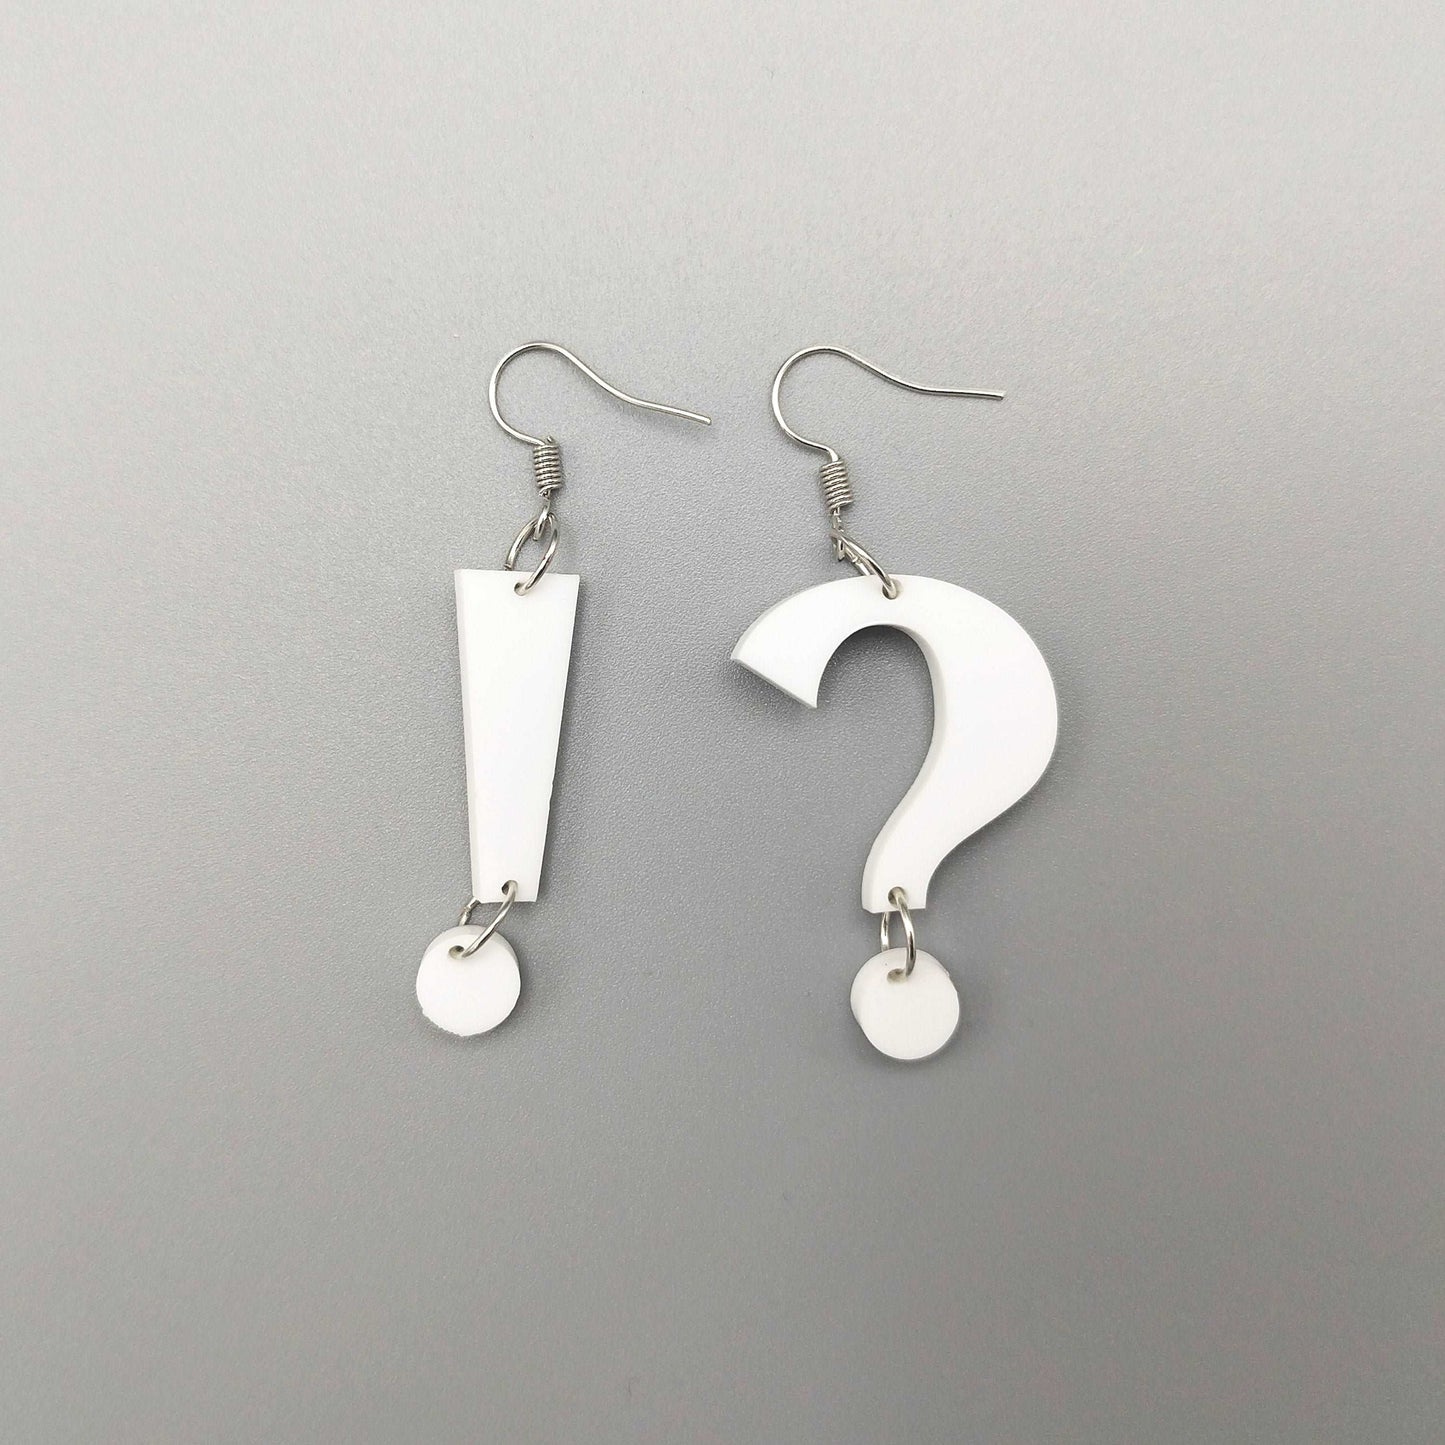 Mismatched Earrings Question and exclamation mark_03